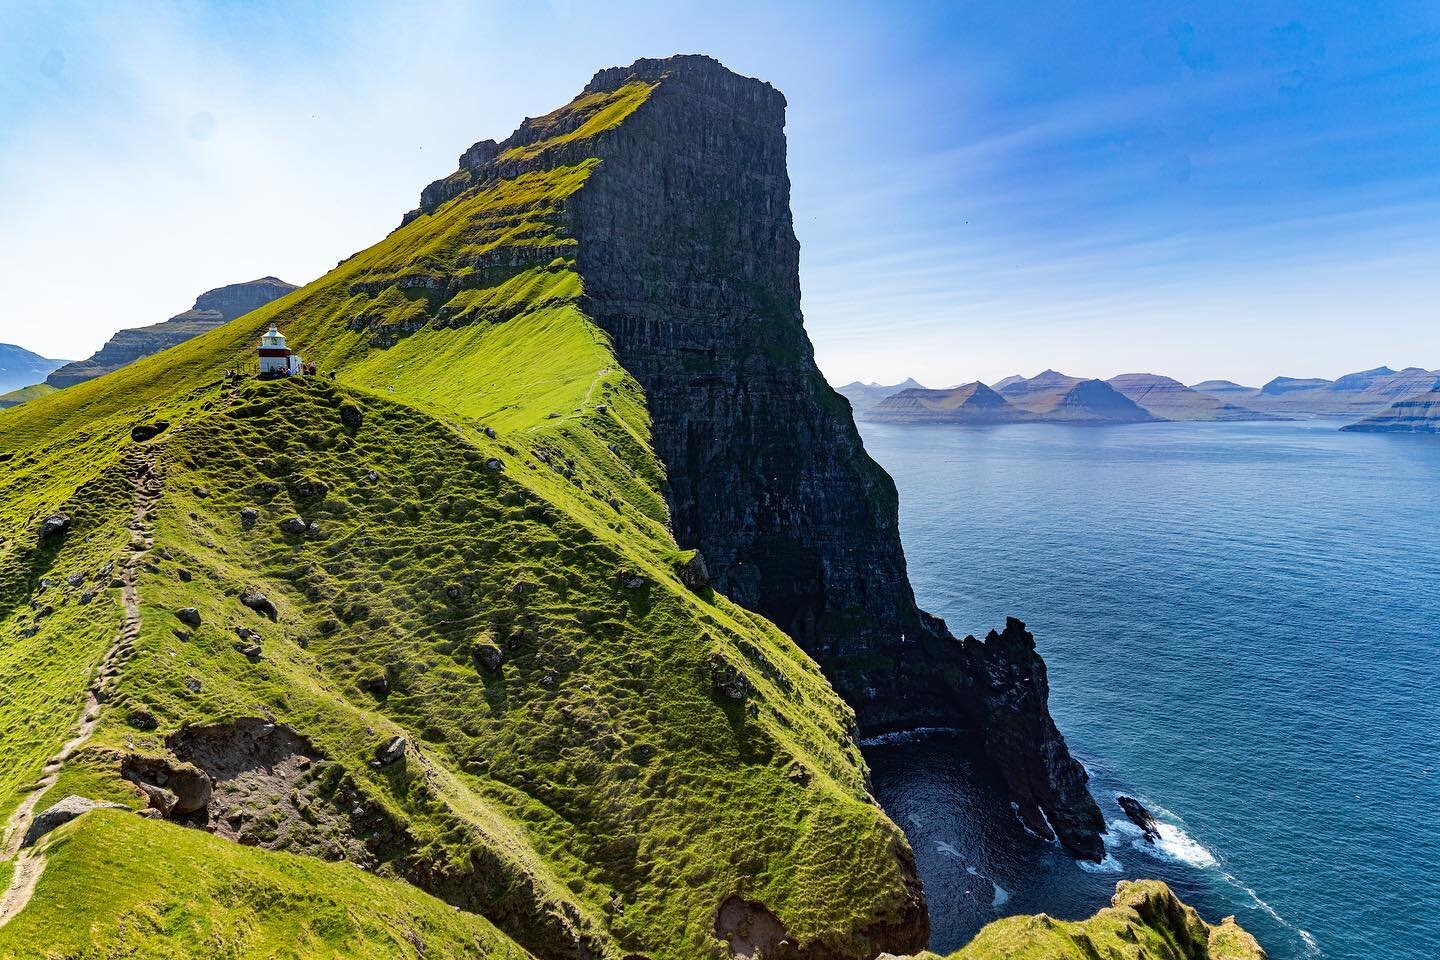 NEW BLOG POST! (Link in profile)
One of my favourite days in the Faroe Islands was exploring the northern island of Kalsoy. Beautiful sunshine, waterfalls, epic vistas, and a few puffins to boot! Read more about it on leavingsanity.ca (link in profil